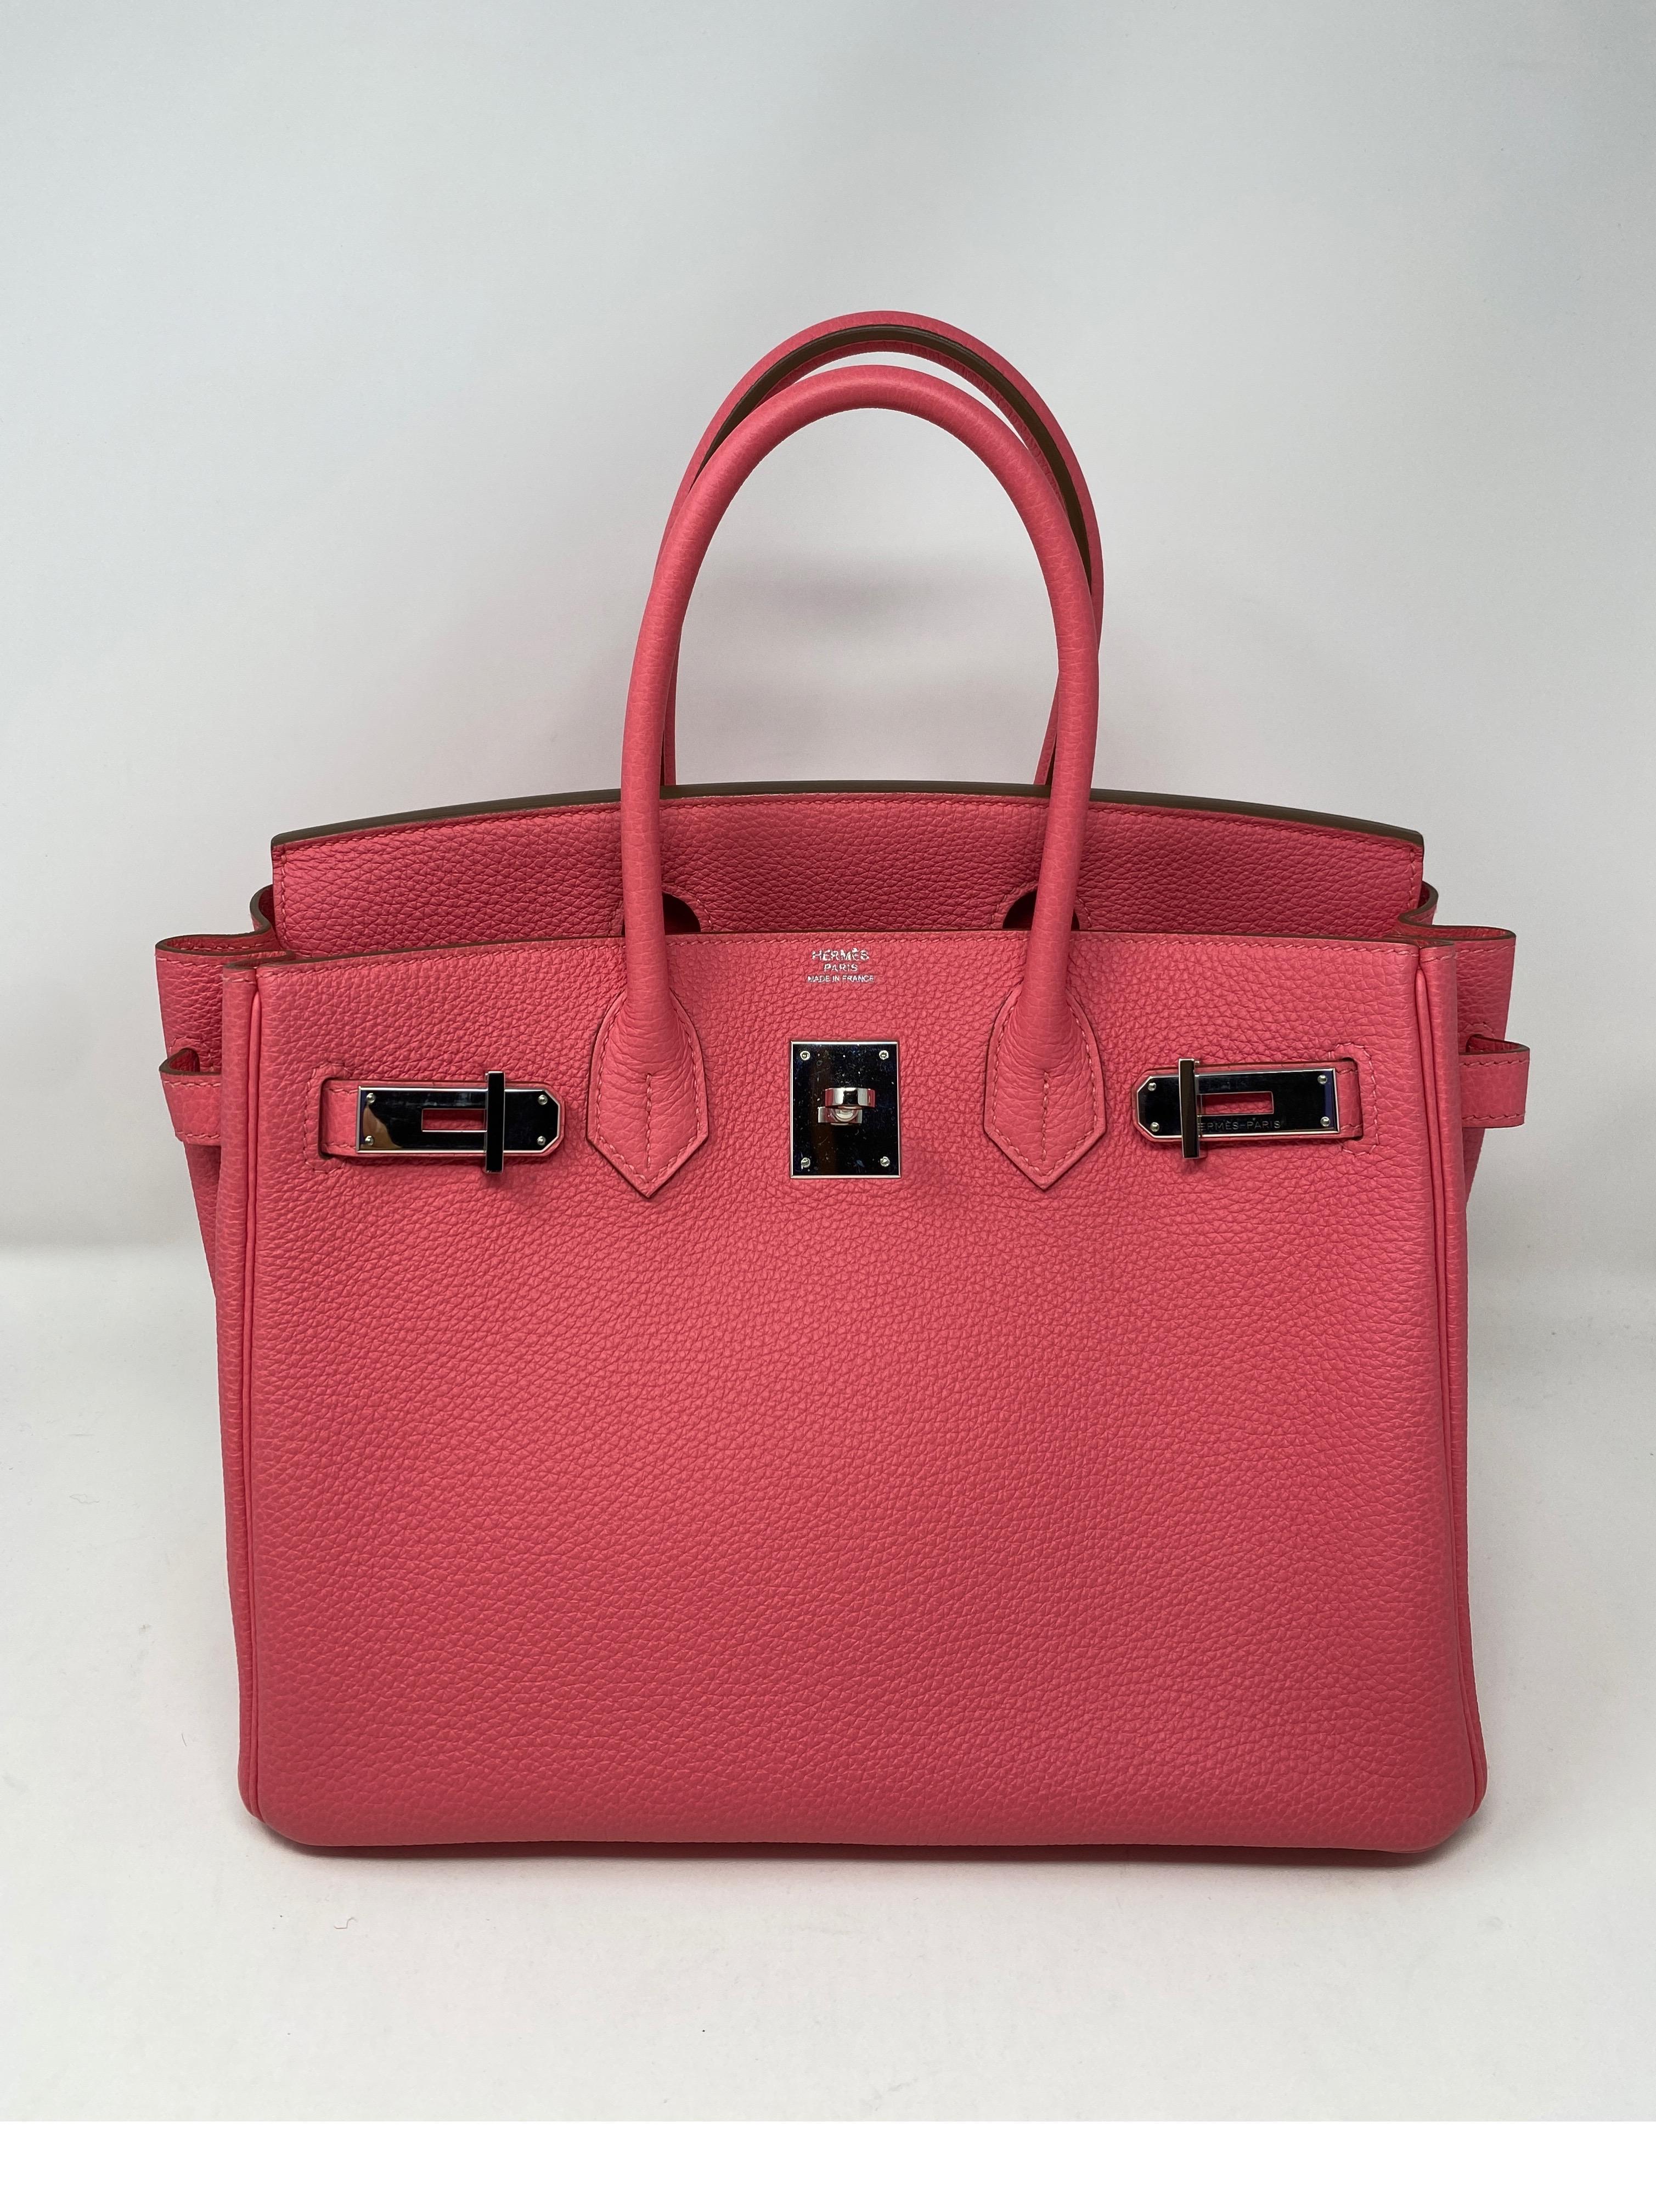 Hermes Rose Lipstick Birkin 30 Bag. Palladium hardware. The most coveted size for Birkin bags. Beautiful bubble gum pink color. Rare color. Mint like new condition. Looks like new. Never worn. Interior pristine. Includes clochette, lock, keys, and